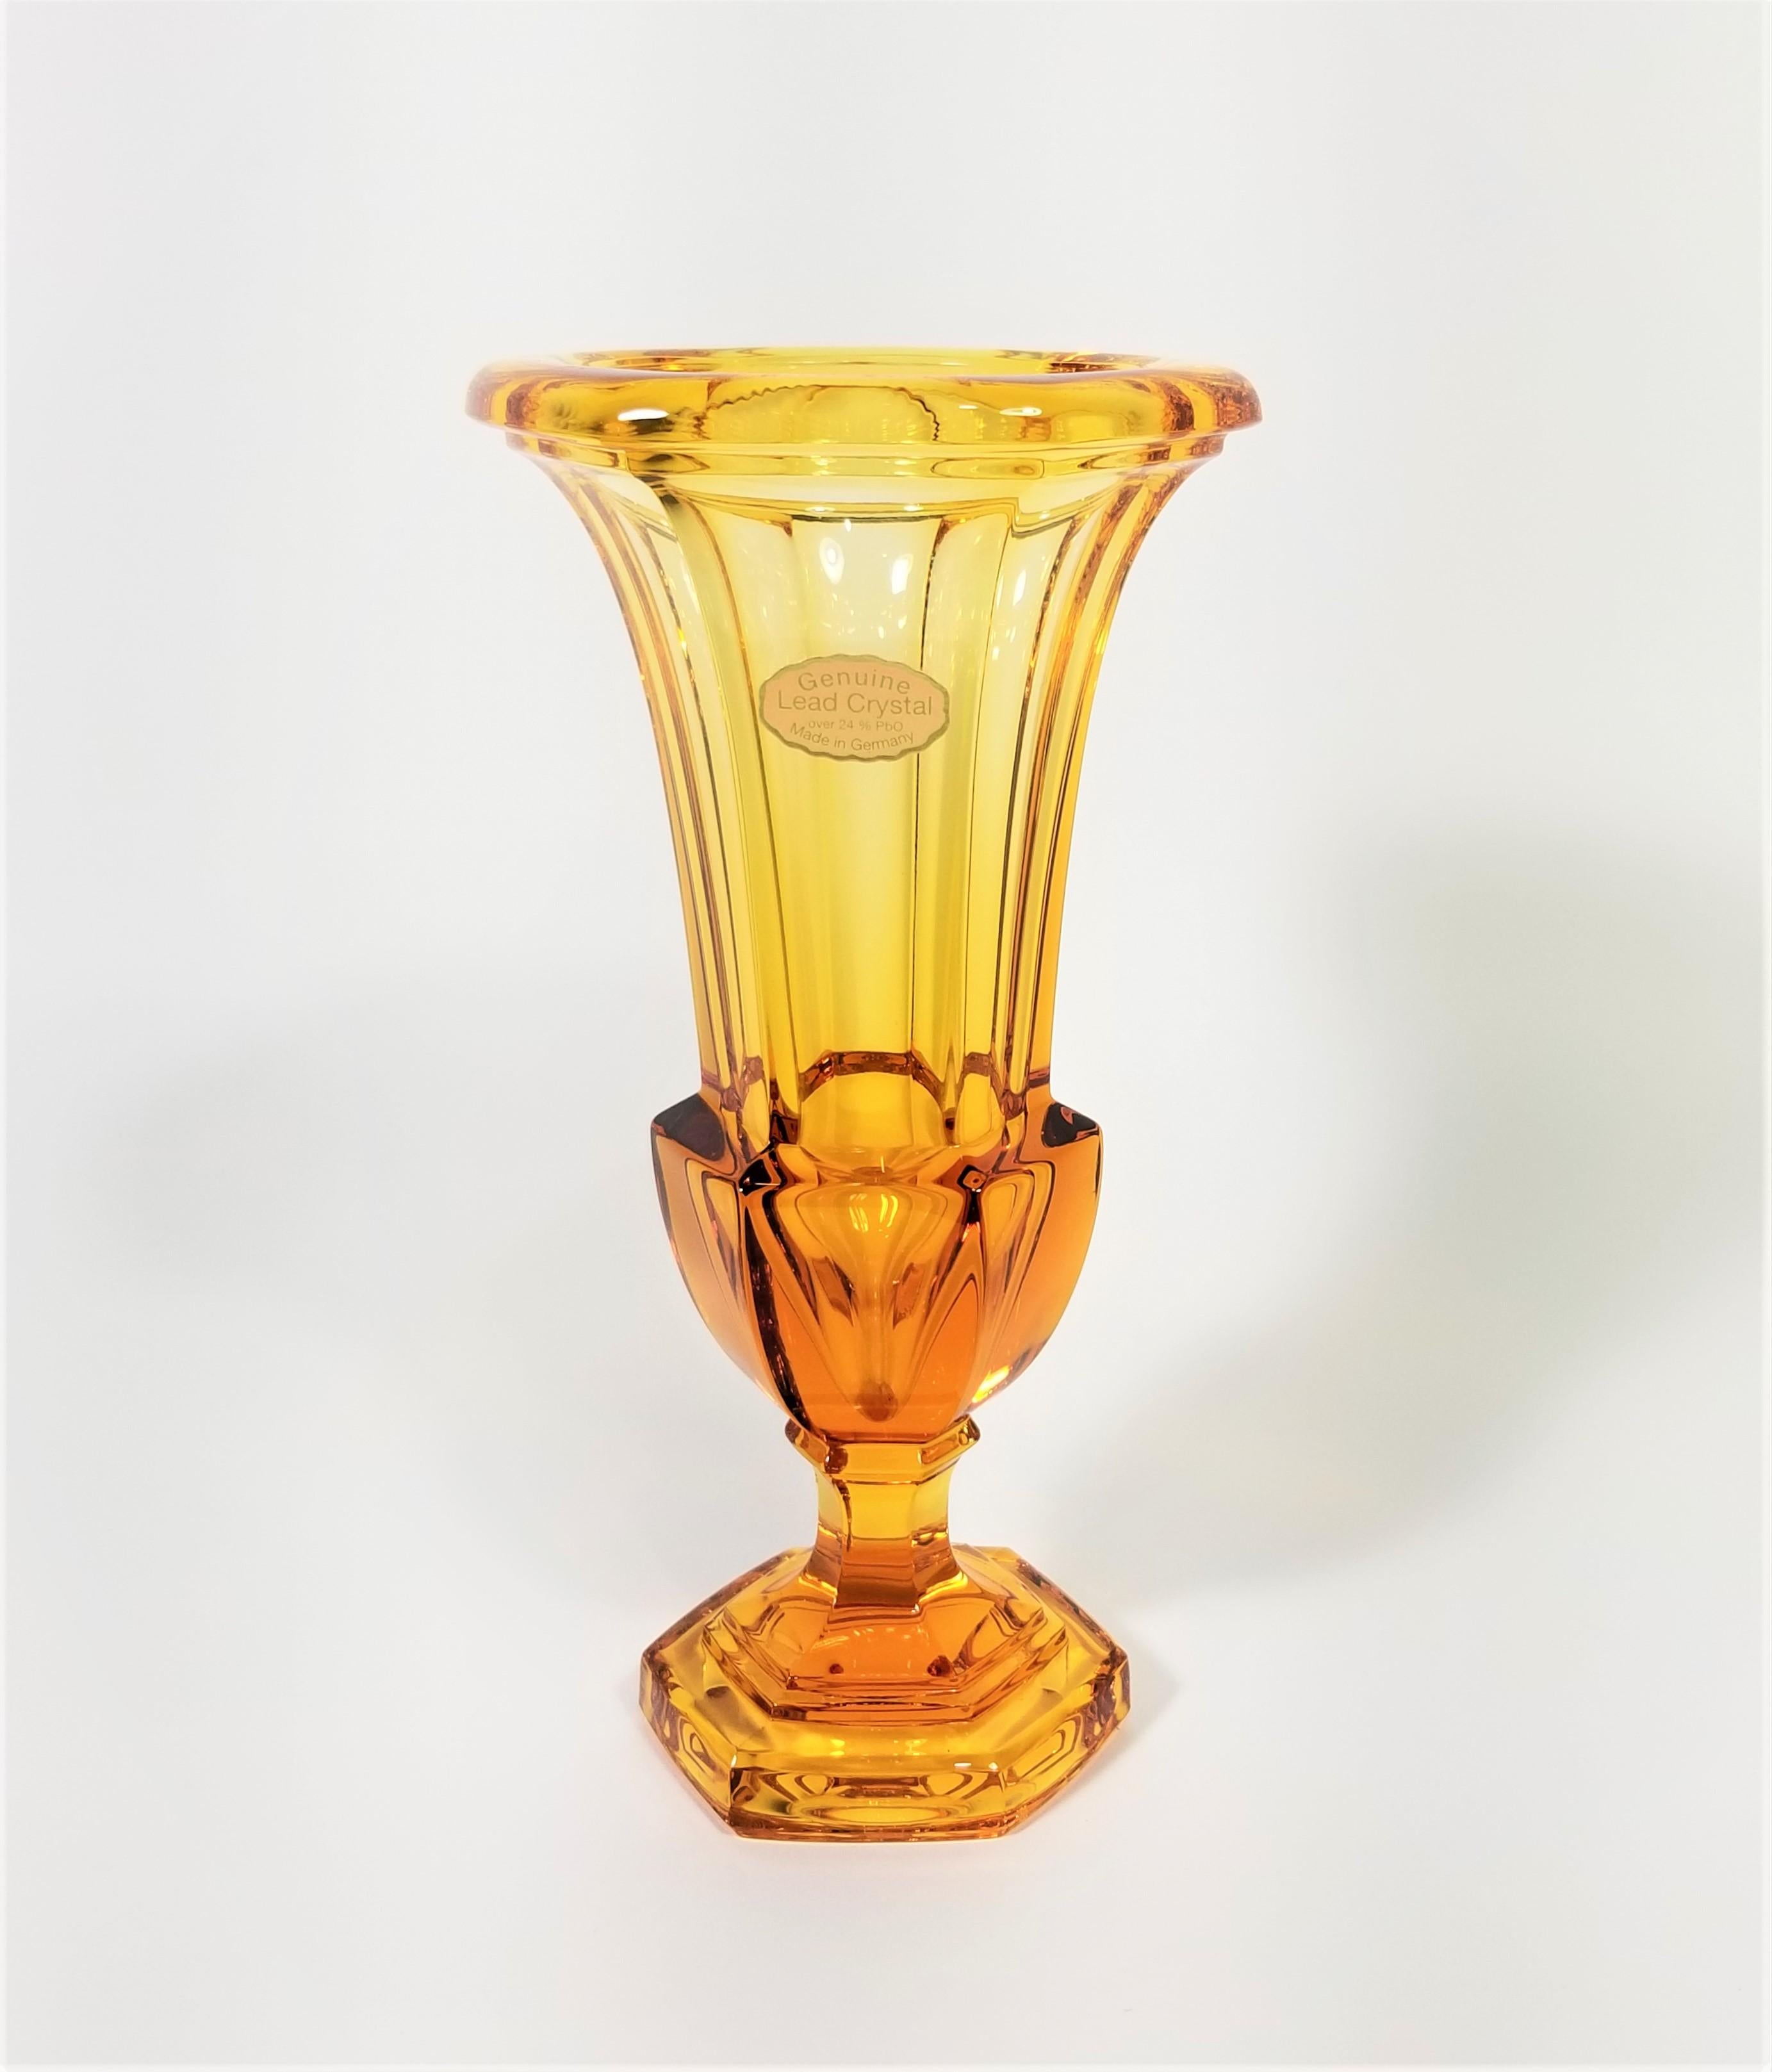 Gorgeous midcentury lead crystal vase. Beautiful amber color, 1950s-1960s. Still retains original marking sticker. Made in Germany. Excellent condition.